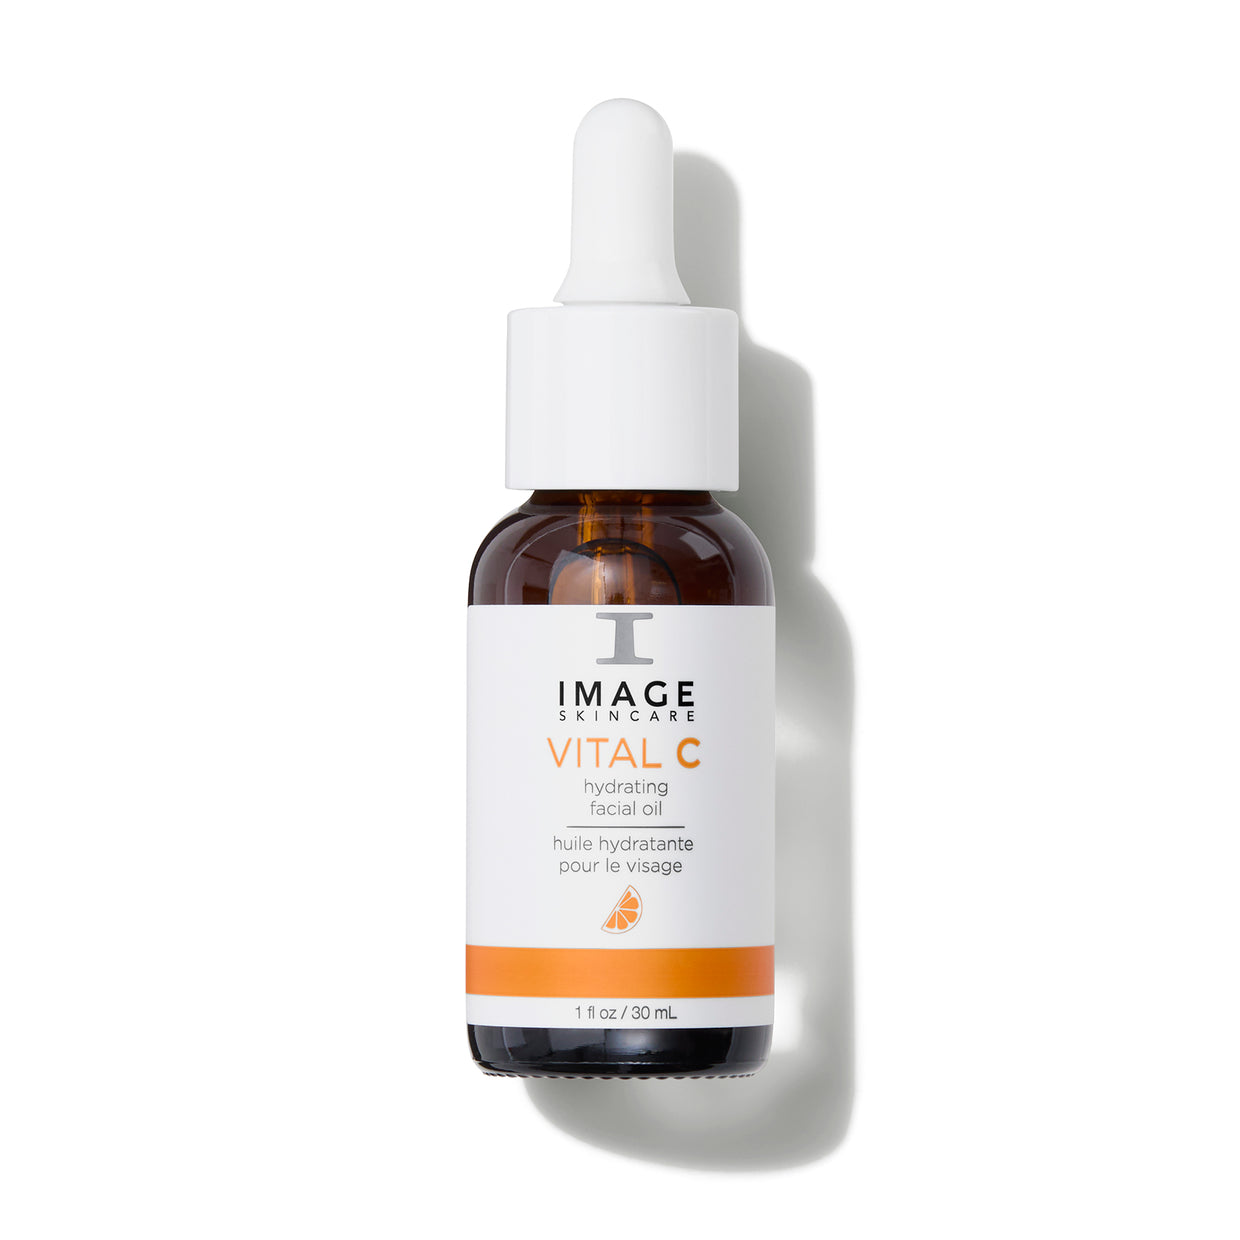 Image Skincare Vital C Hydrating Face Oil Shop At Exclusive Beauty